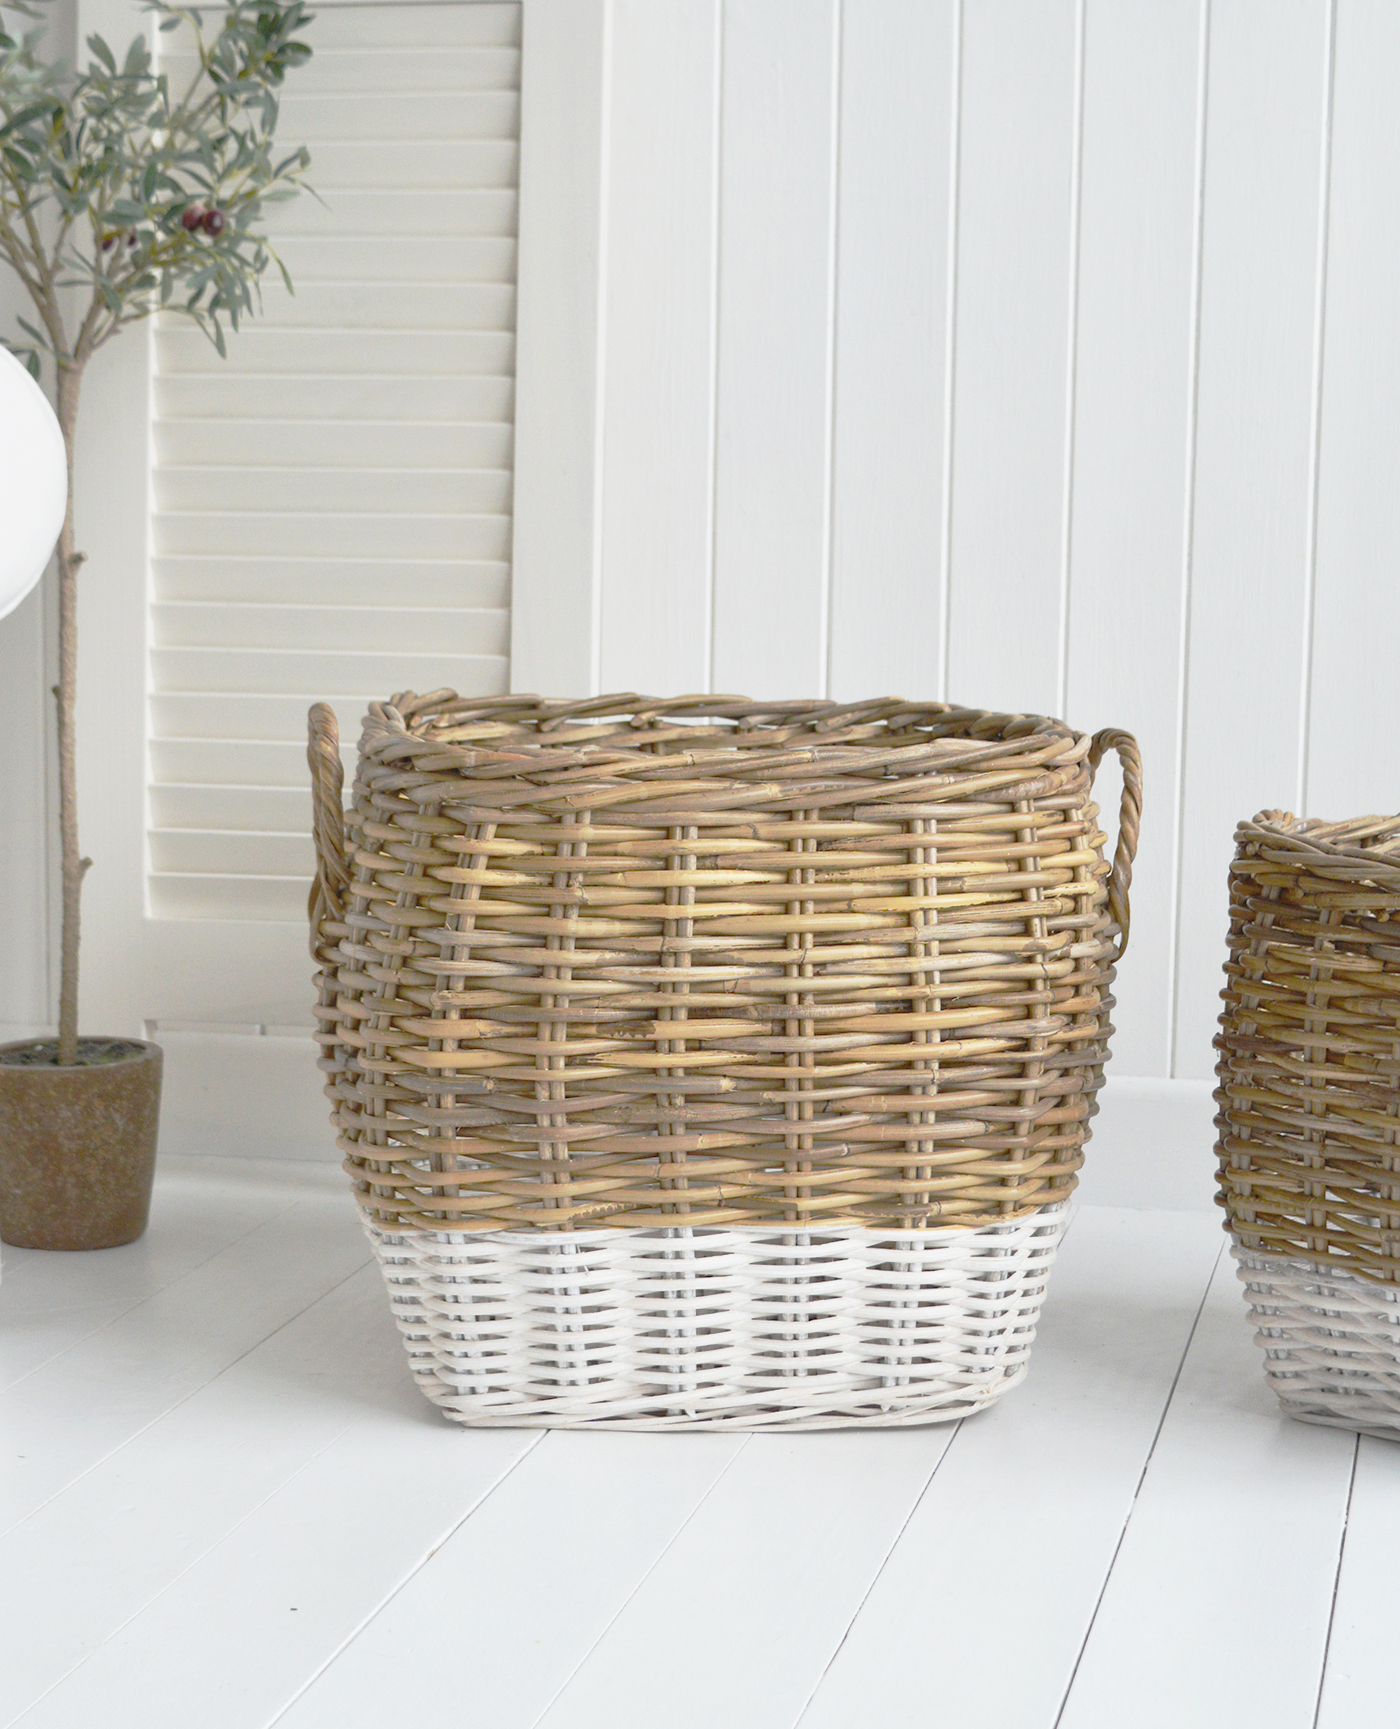 Farmington Square baskets in grey and white with handles for logs, toys and everyday storage from The White Lighthouse Furniture and Home Interiors for New England, modern farmhouse country, coastal and city homes for hallway, living room, bedroom and bathroom